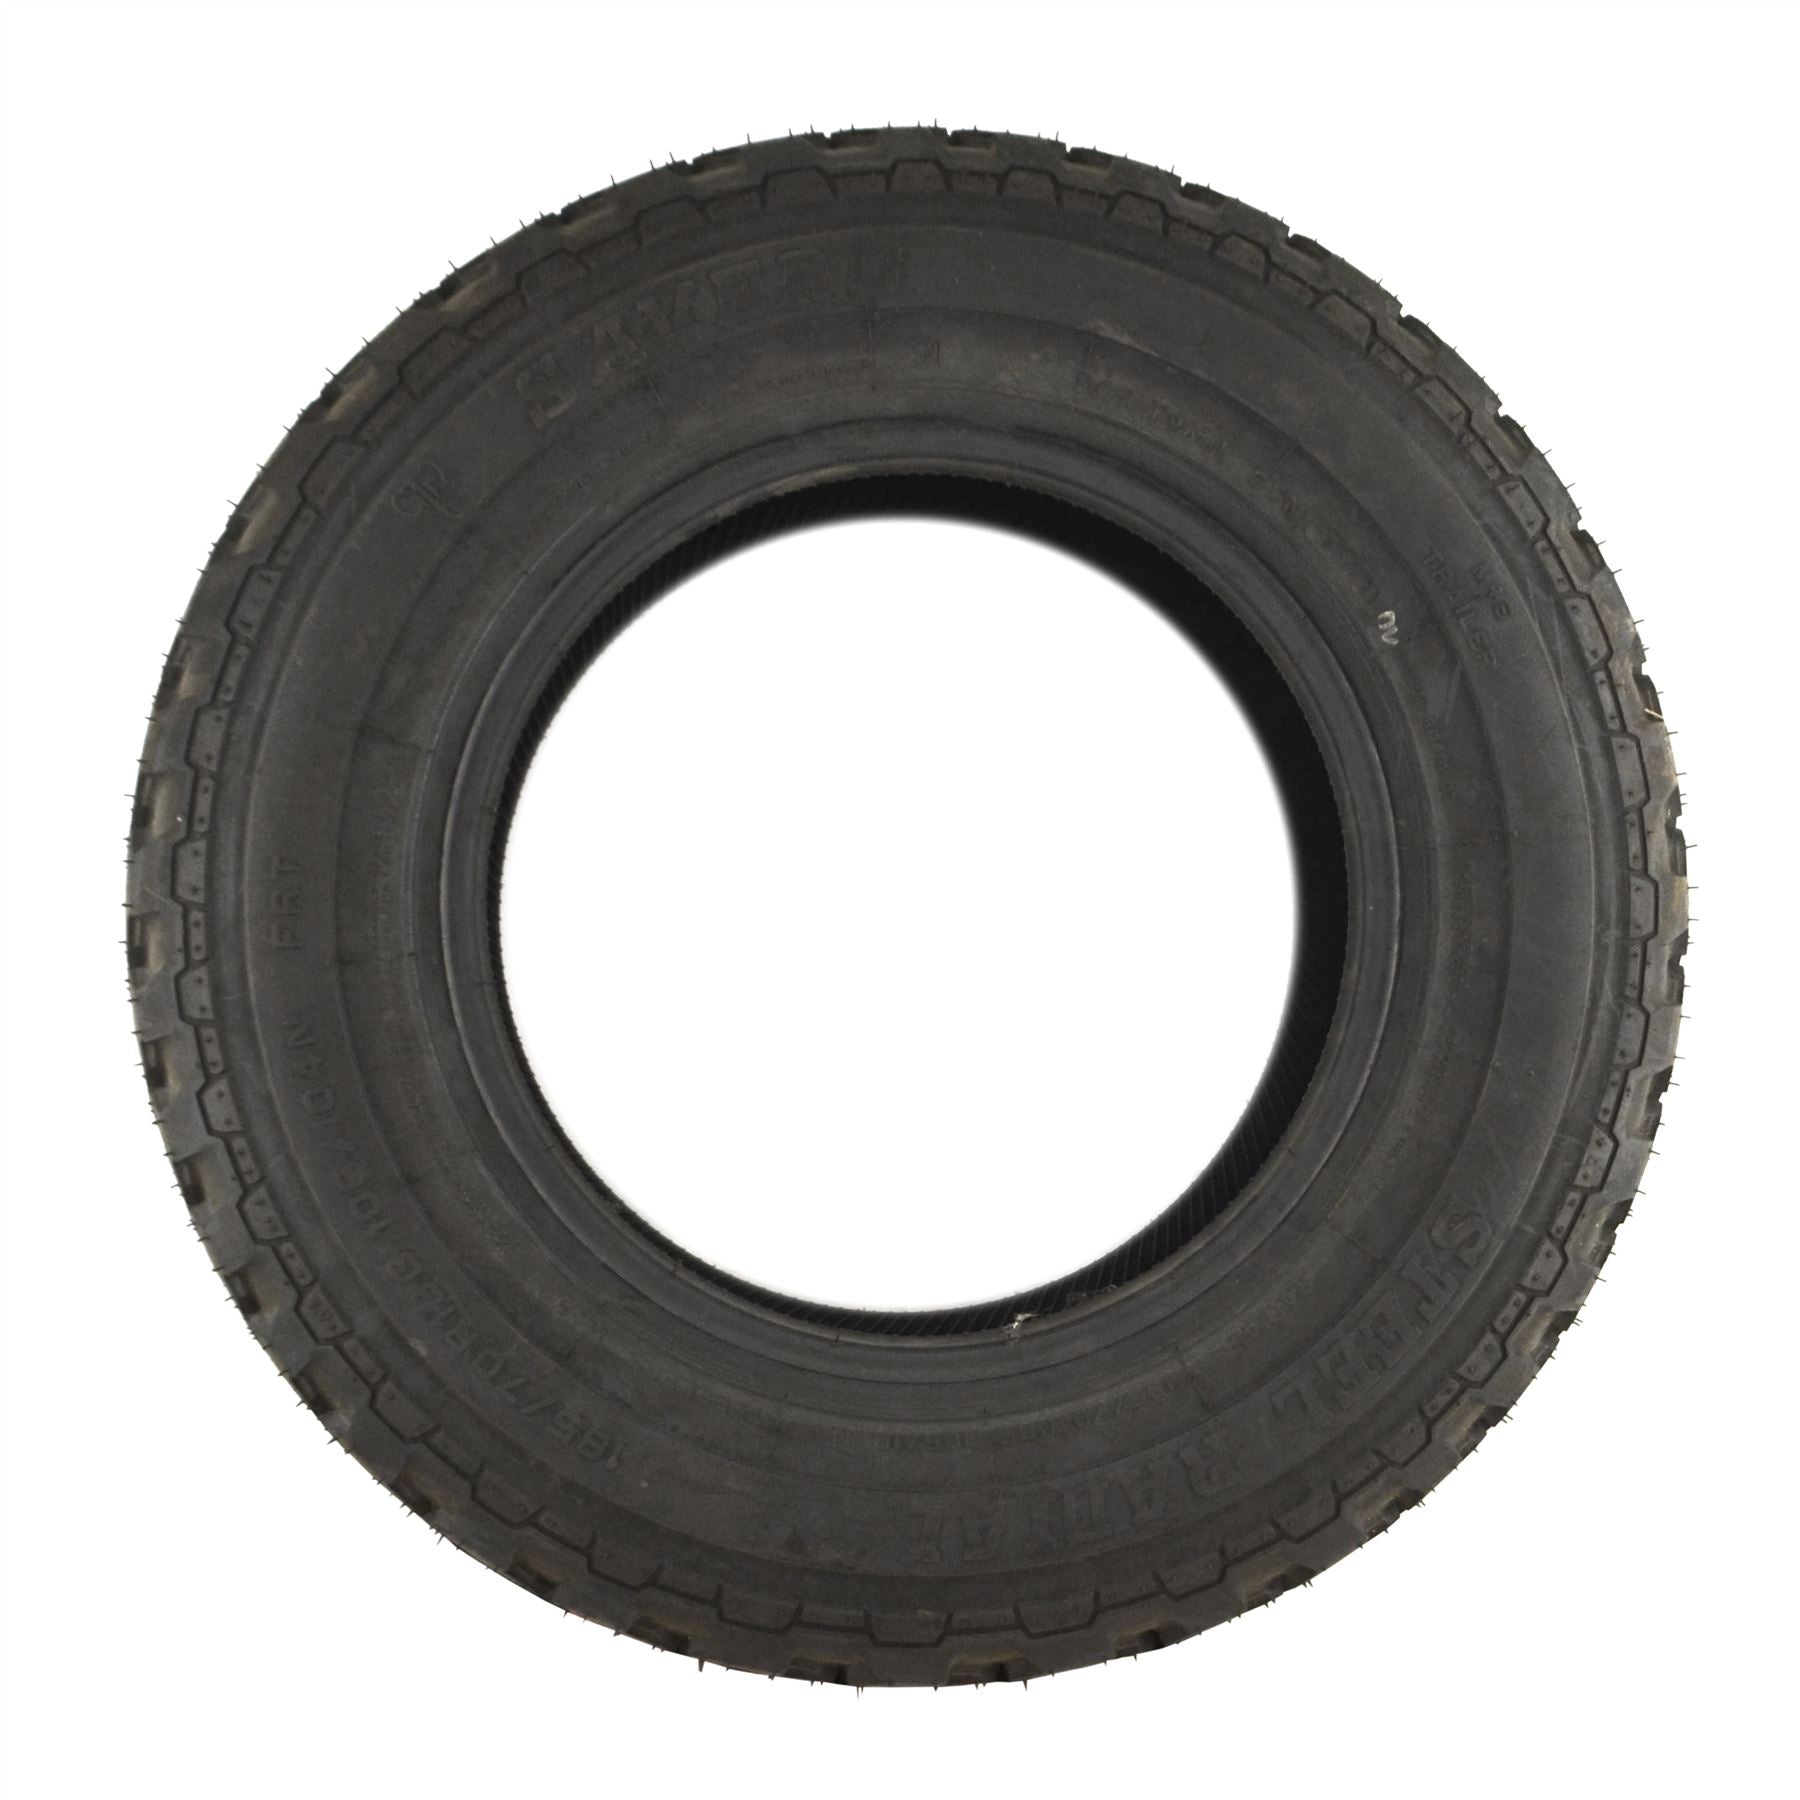 185/70 R13 - Trailer Tyre Tire Only 106/104N Radial Tubeless 950kg Max TRSP24